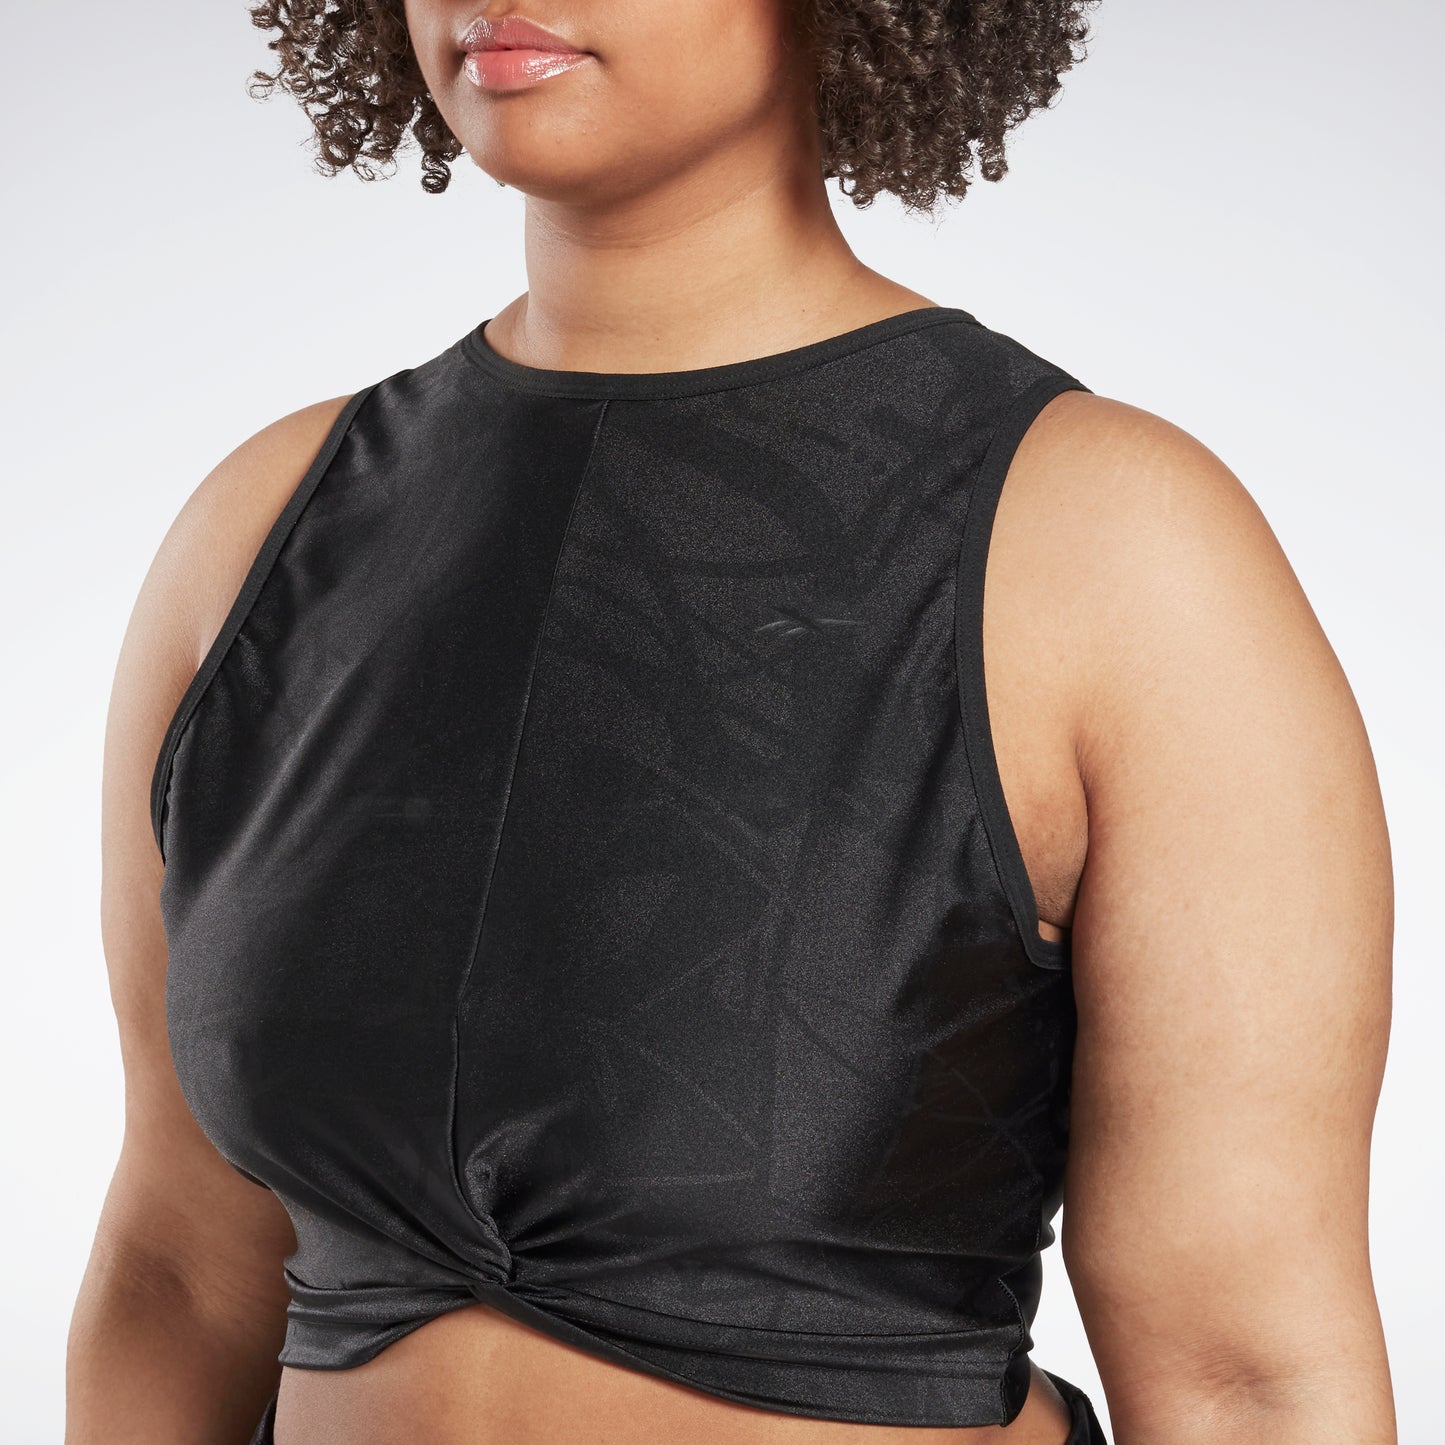 Womens Yoga Lounge Sports Bra Push Up Align Crop Top For Bodybuilding,  Running, Fitness And Workouts From Top_toggery, $25.12